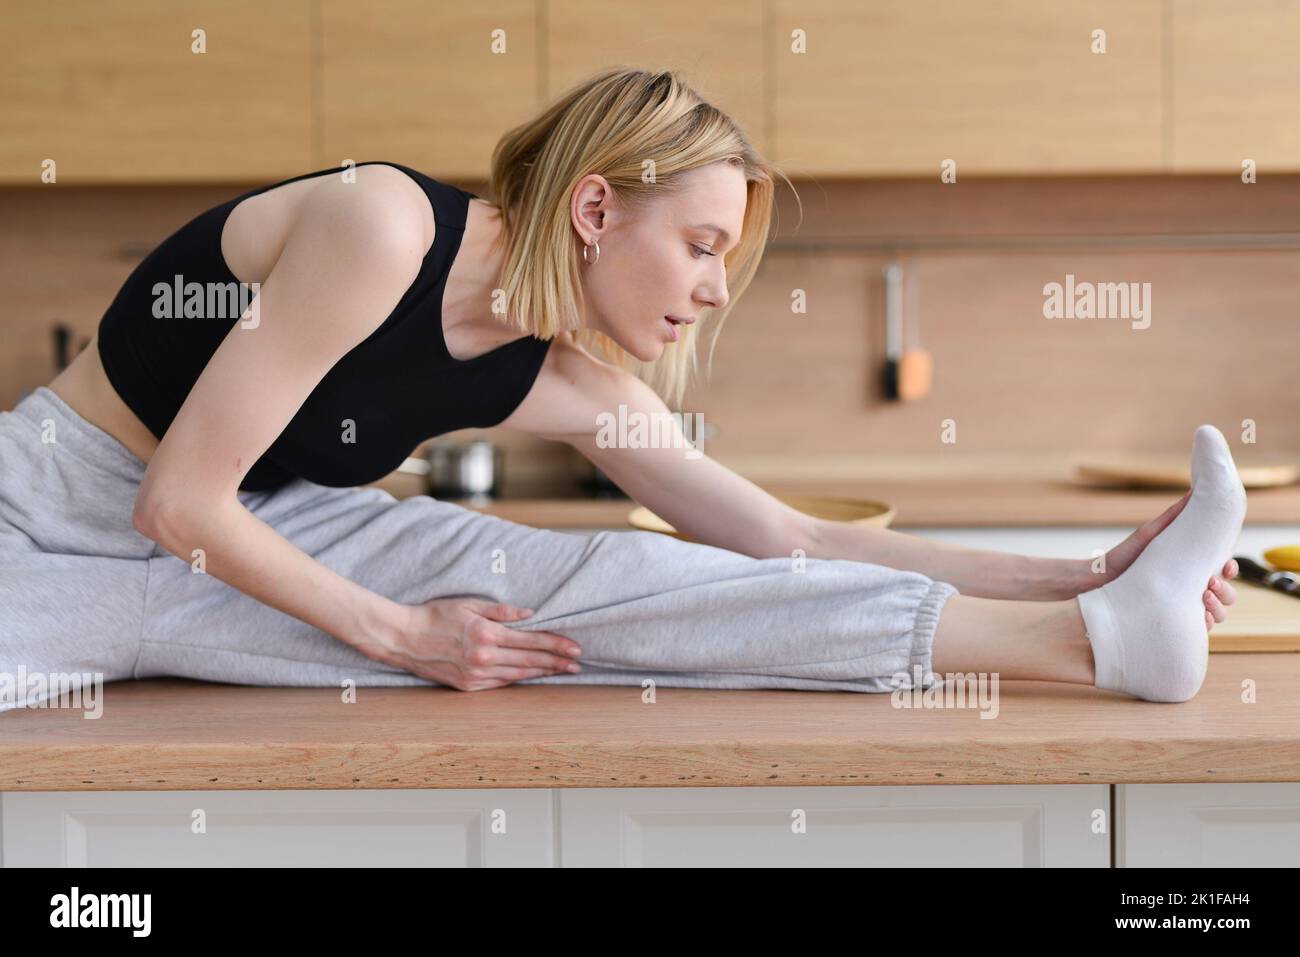 Woman sitting on table doing stretching. Stock Photo